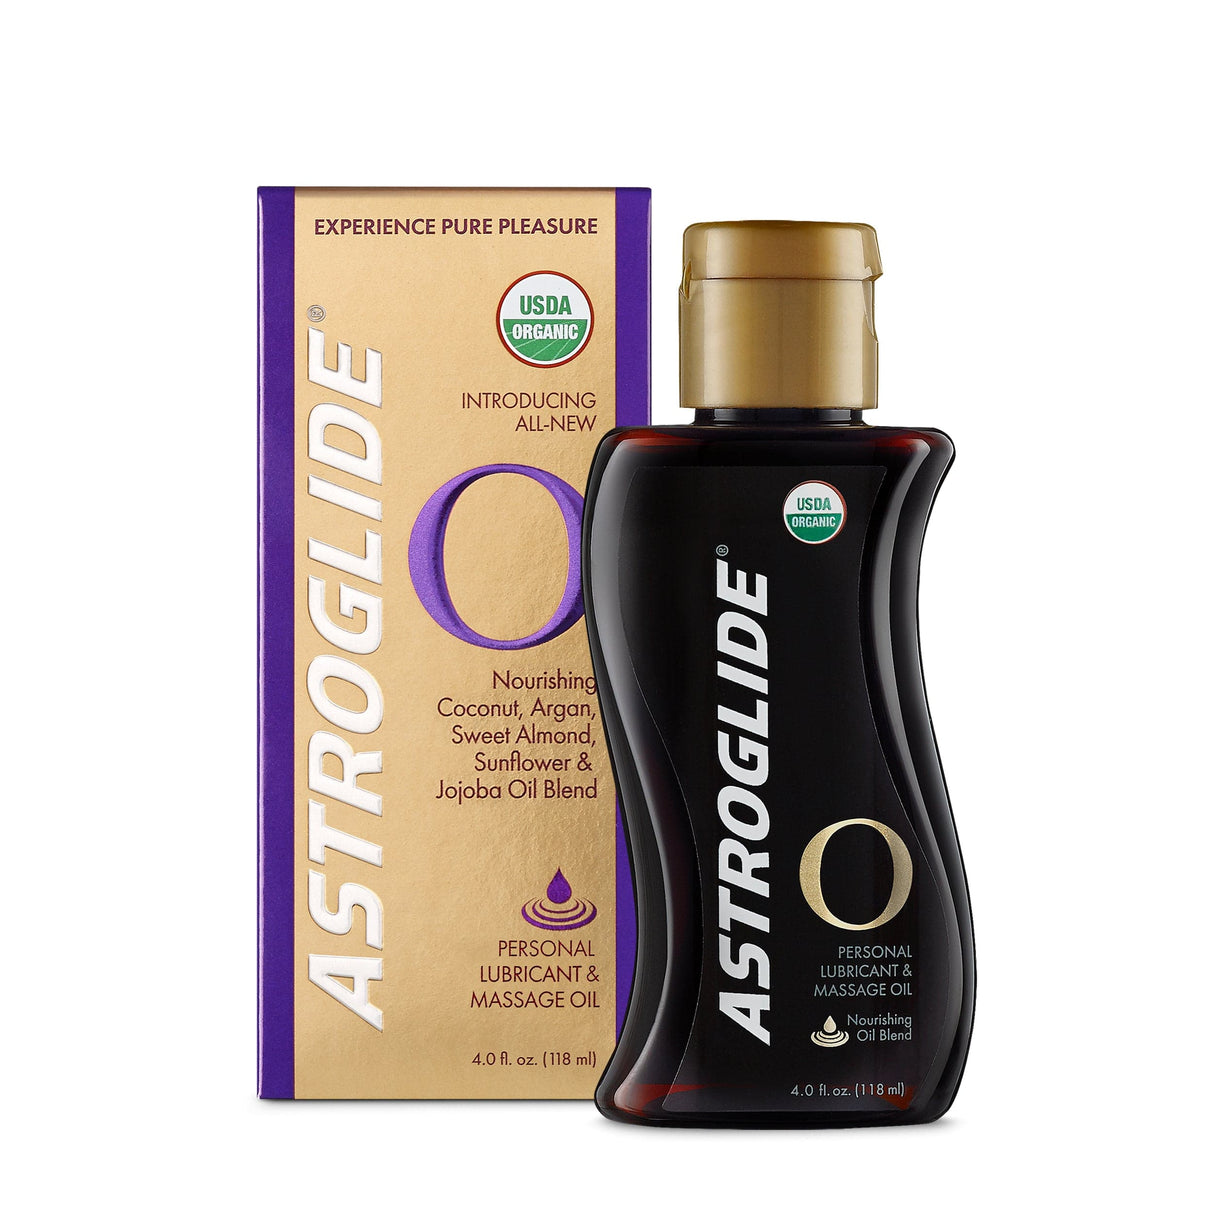 Astroglide - O Sensual Massage Oil and Personal Lubricant AG1016 CherryAffairs